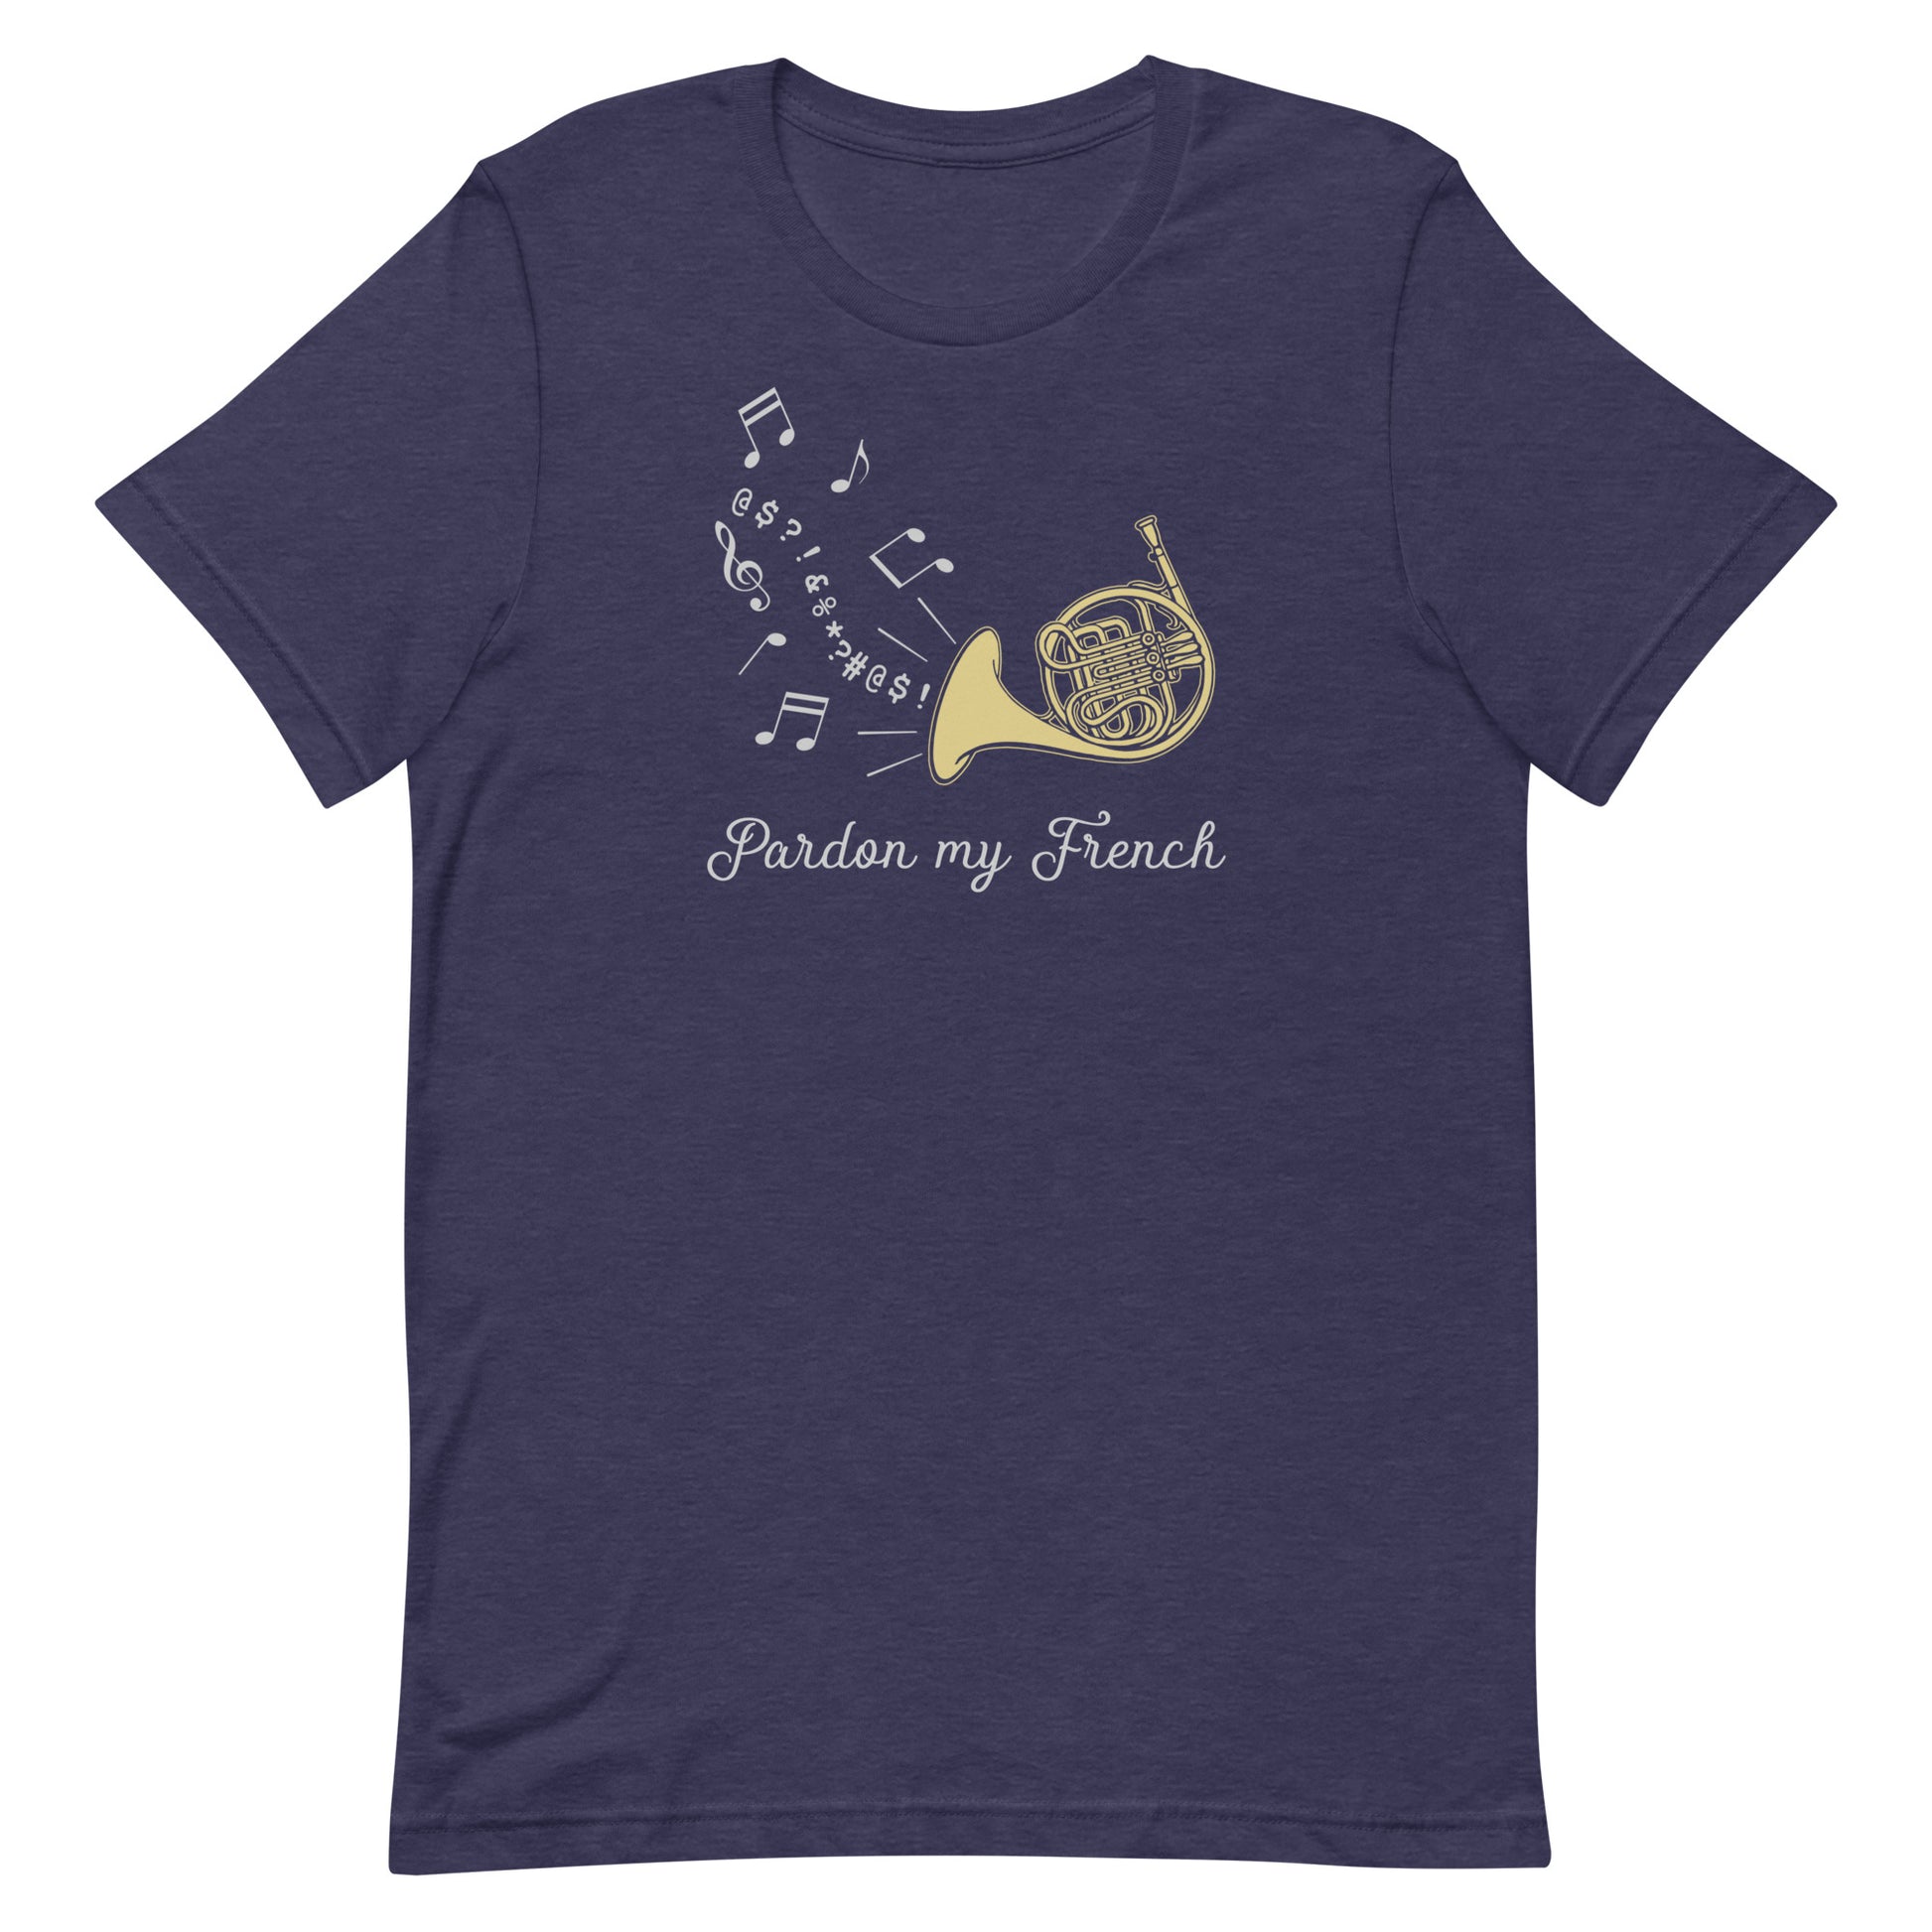 Funny French Horn T Shirt: Pardon My French - Navy Blue